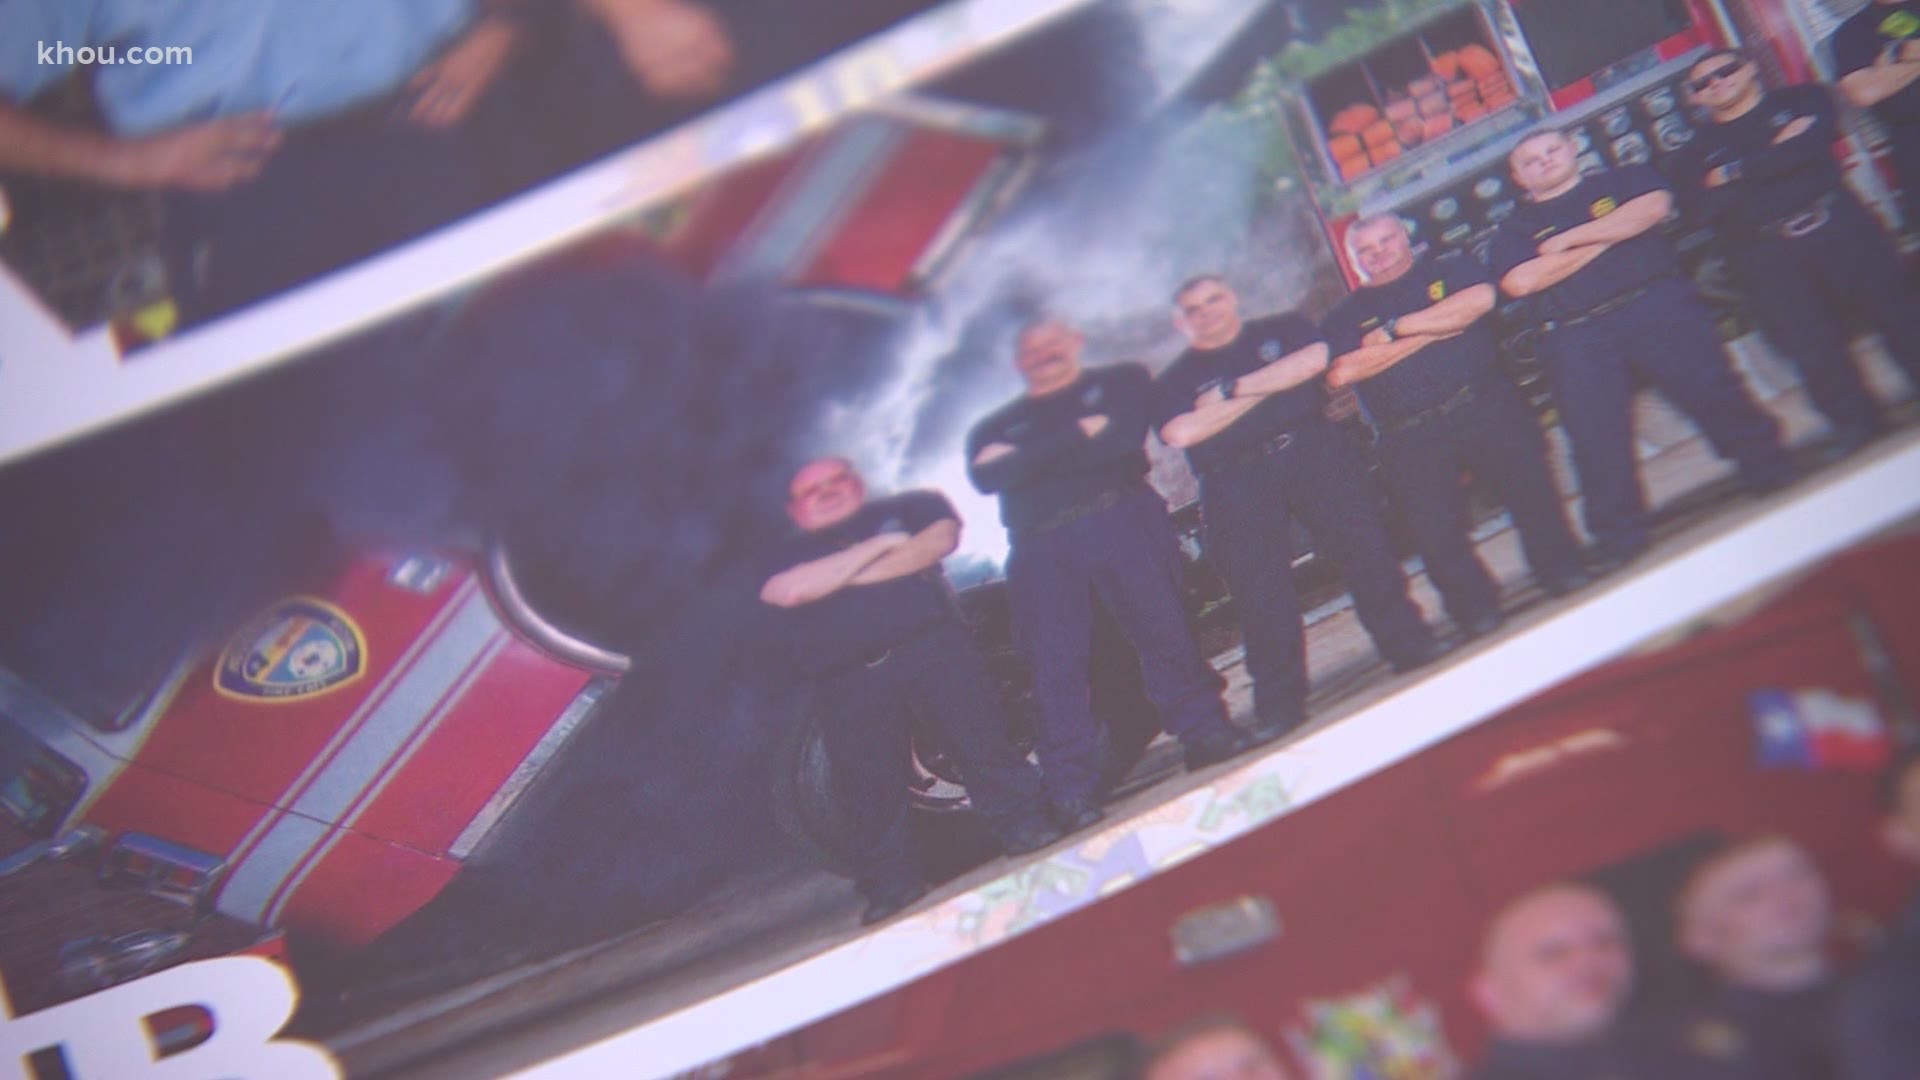 Station 10 B-shift crew members are seen posing in front of engine 10 with smoke spewing from under its engine cab.